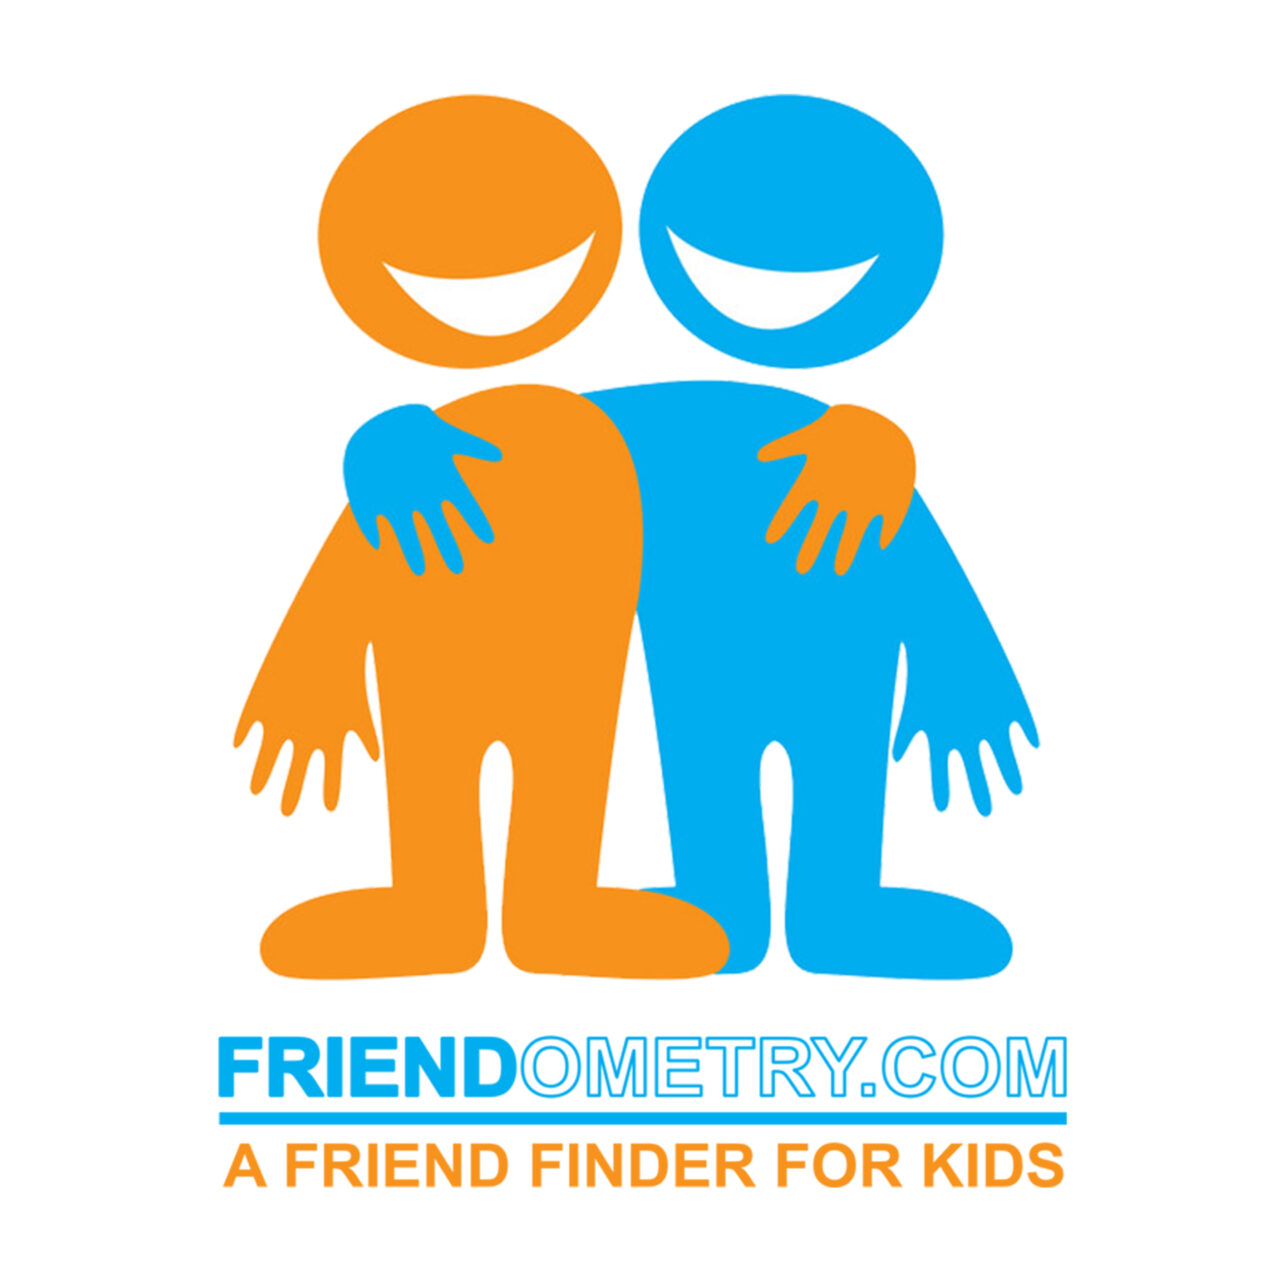 Friendometry.com: Resource for Parents to Help Find Friends for Their Children